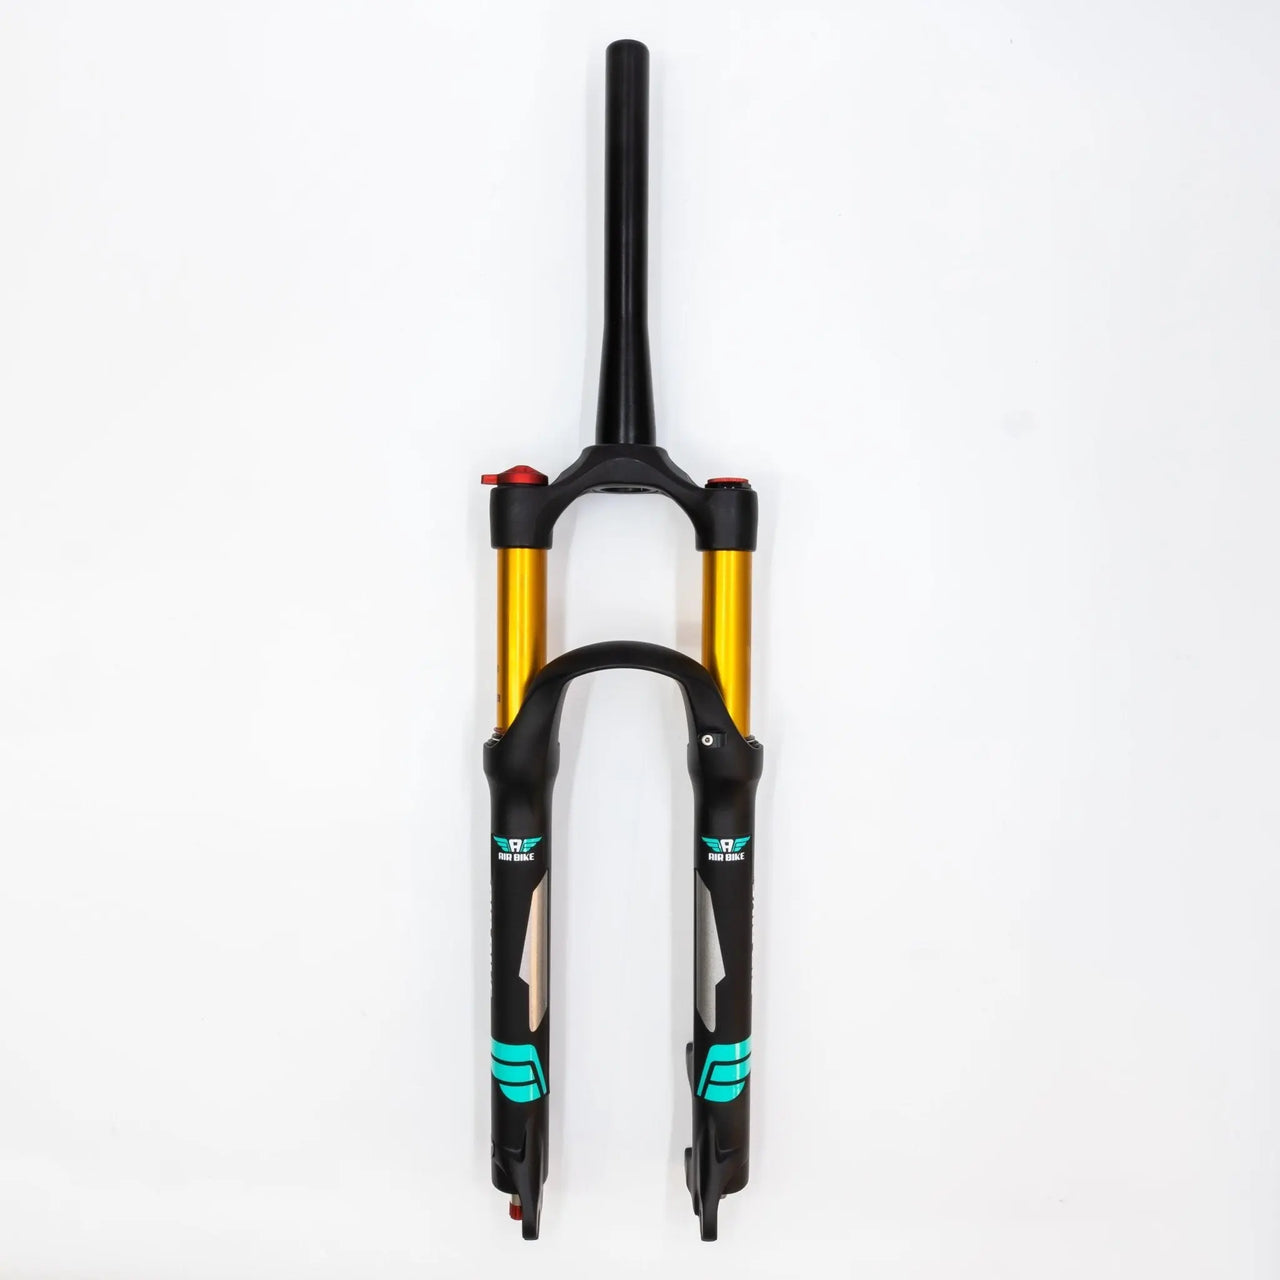 26 Inch Air Fork Tapered XC32A Black 120mm Travel & Rebound Suspension Fork Air Bike - Air BikeSuspension Fork